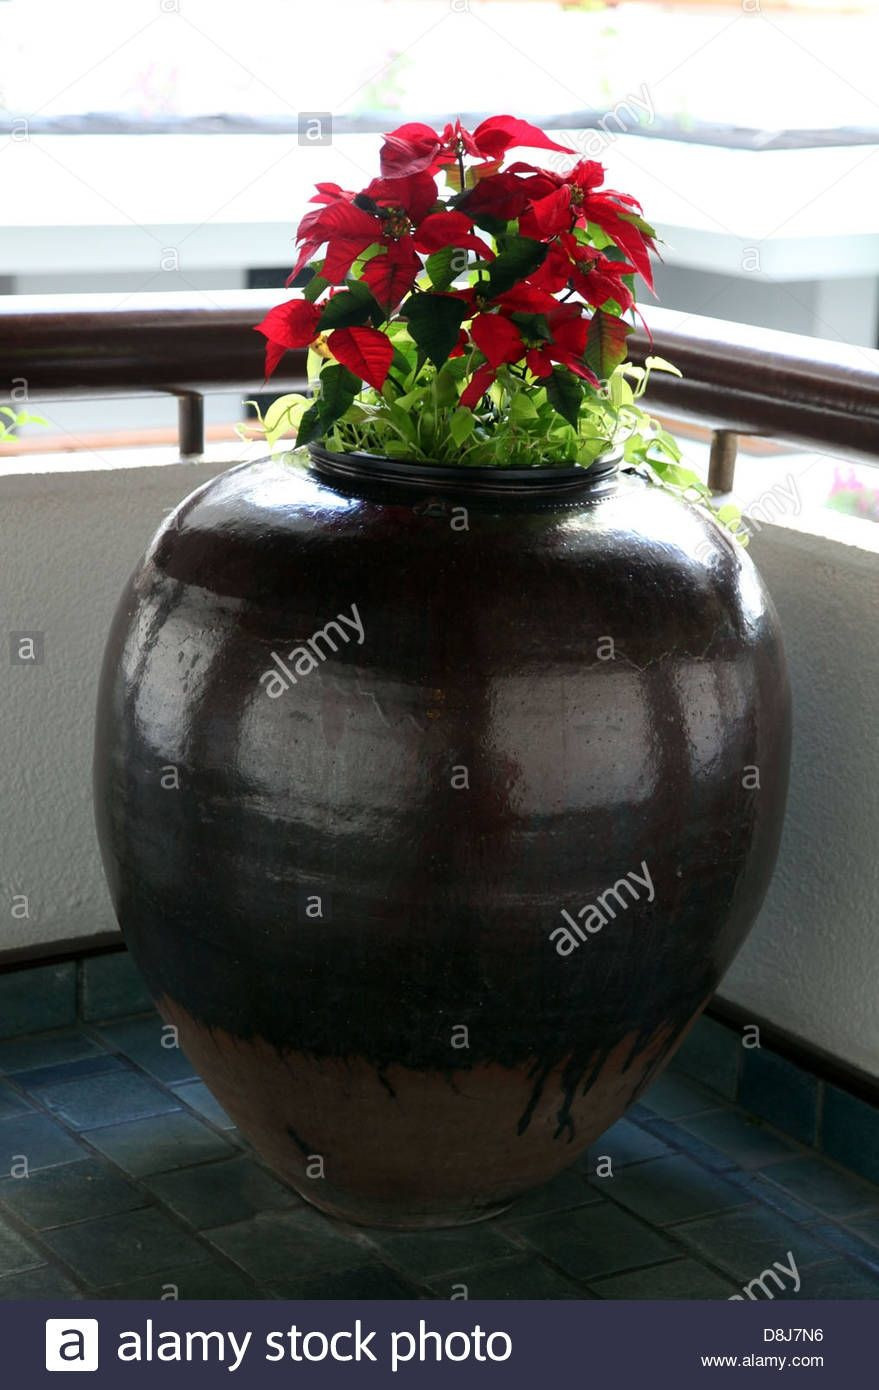 26 Lovely Wide Mouth Vase 2024 free download wide mouth vase of wide glass vase image paint a picture luxury h vases paint vase i 0d intended for wide glass vase pictures corner big flower vase vase pinterest of wide glass vase image p